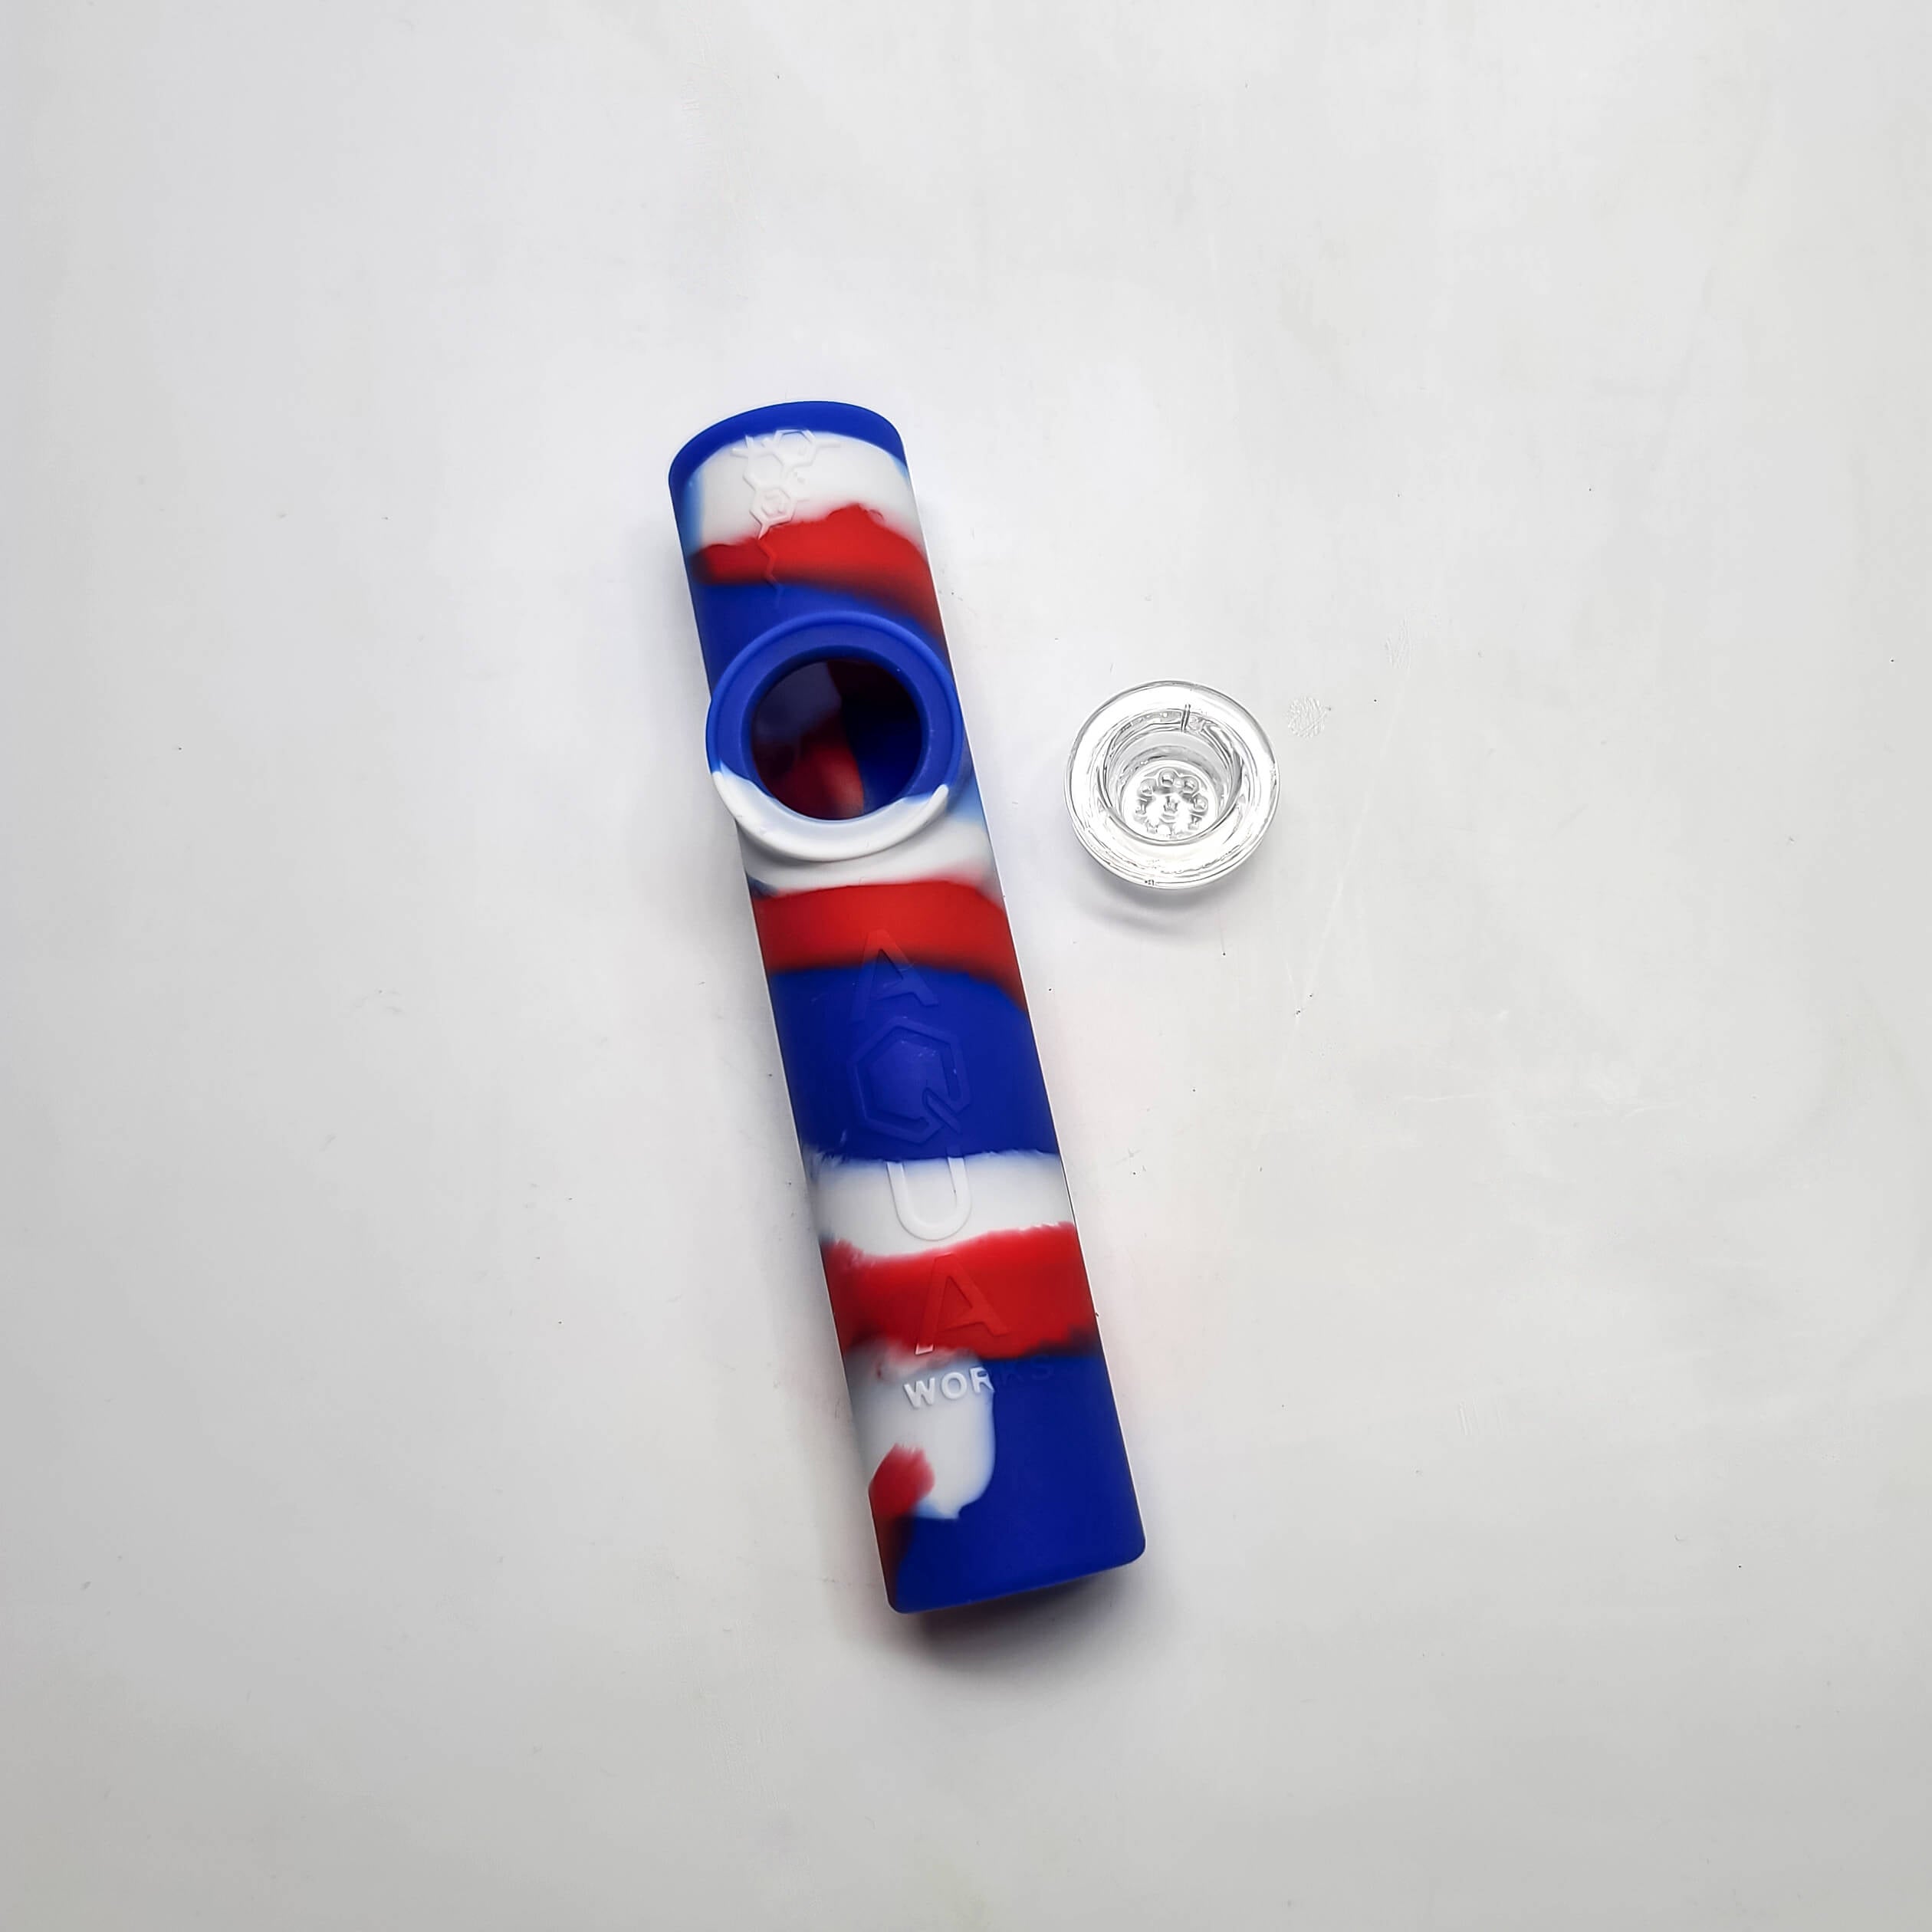 AQ Silicone - Steamroller (Small)